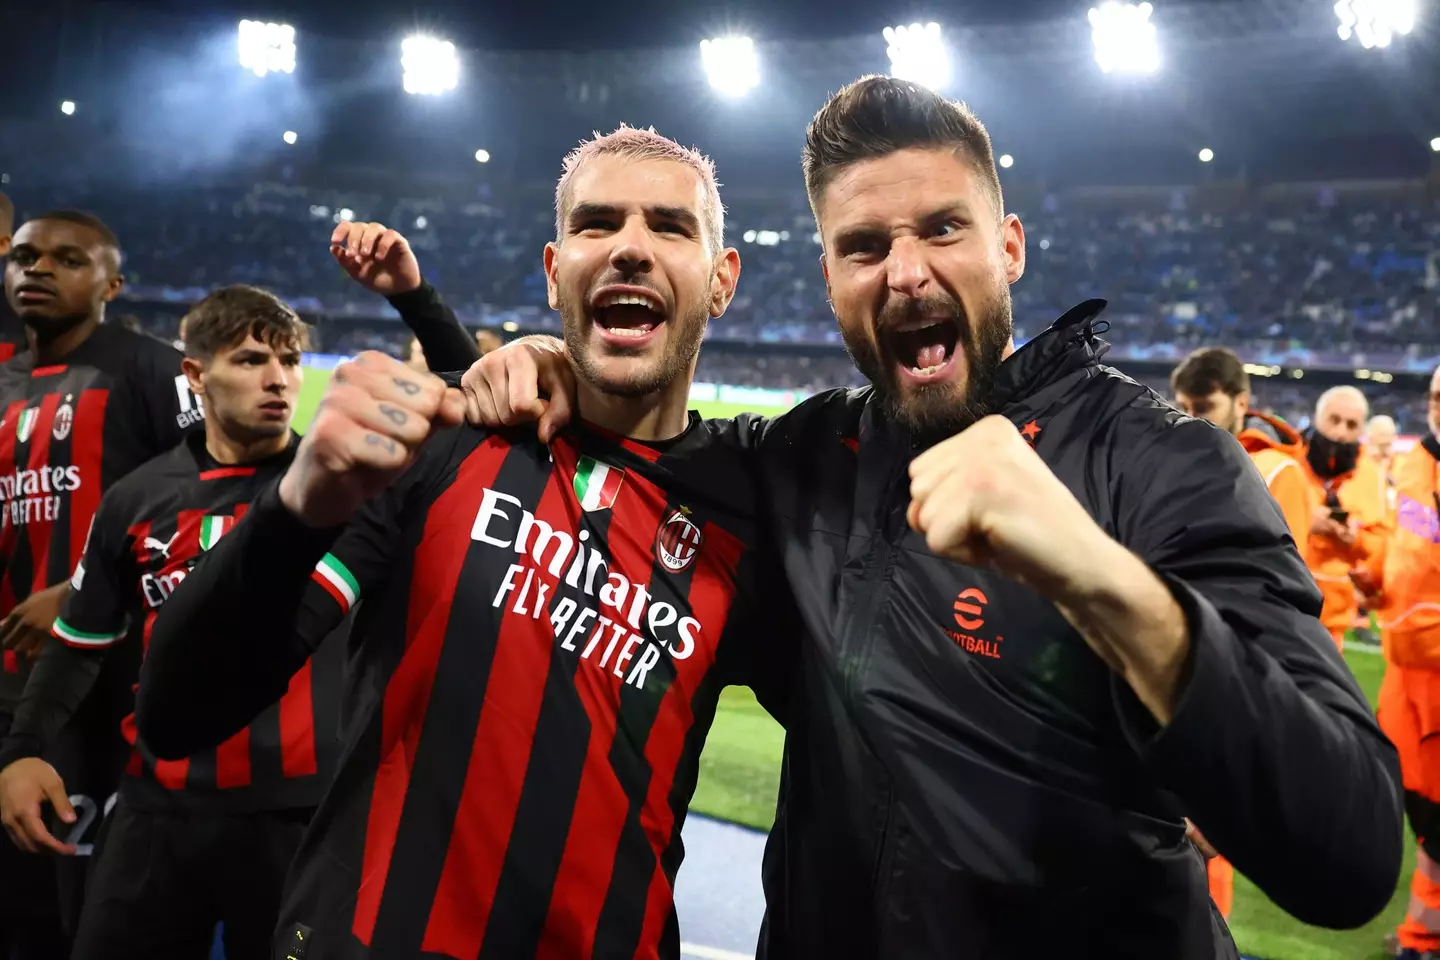 Theo Hernandez celebrates with Giroud after Milan made it through to the final four of the Champions League. Image: Alamy